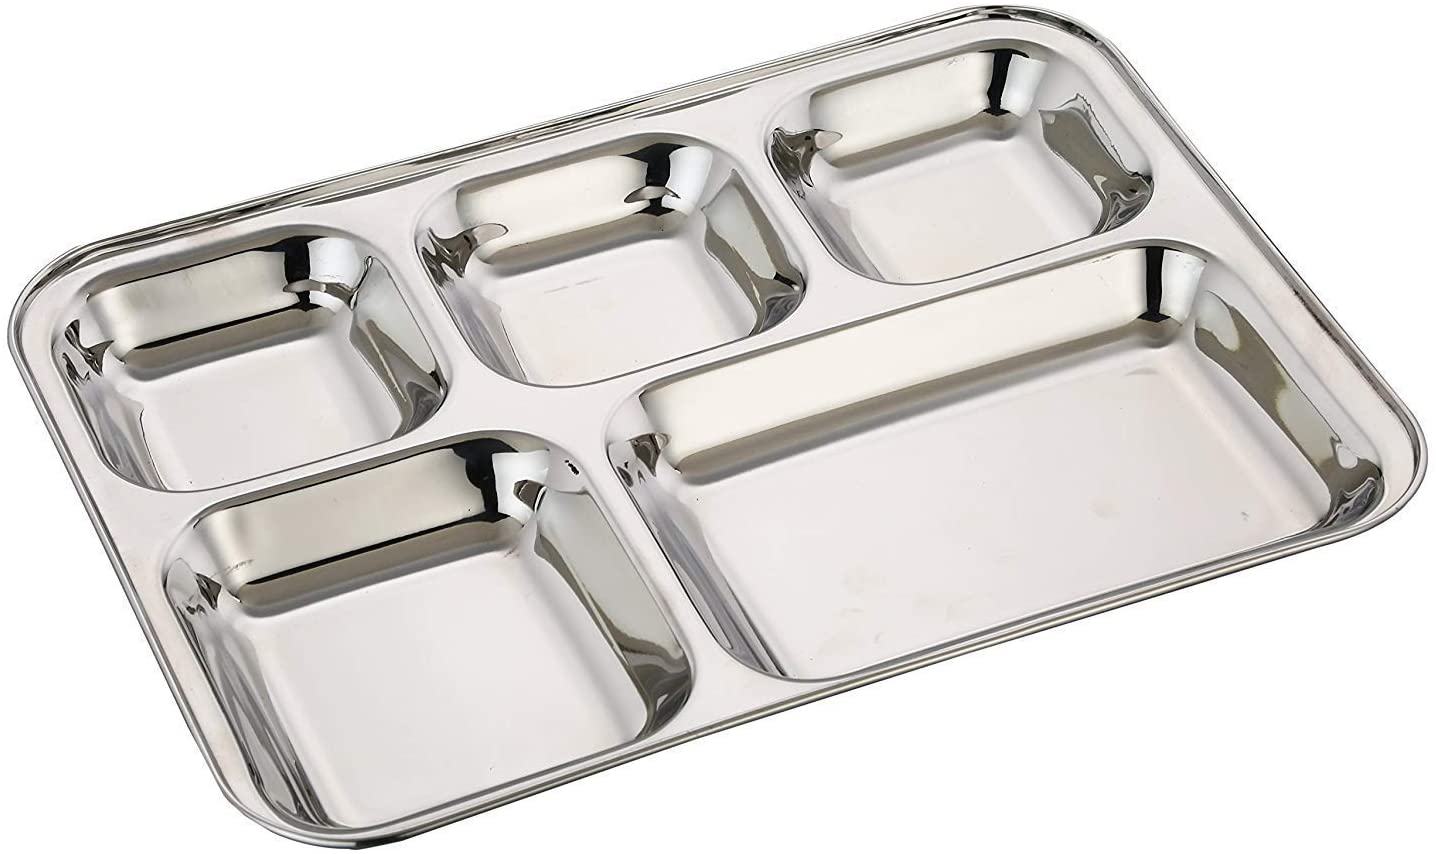 Ecozoi Stainless Steel Portion Control Dinner Plates with Dividers - 5 Compartments, 2 Pack Ecozoi 